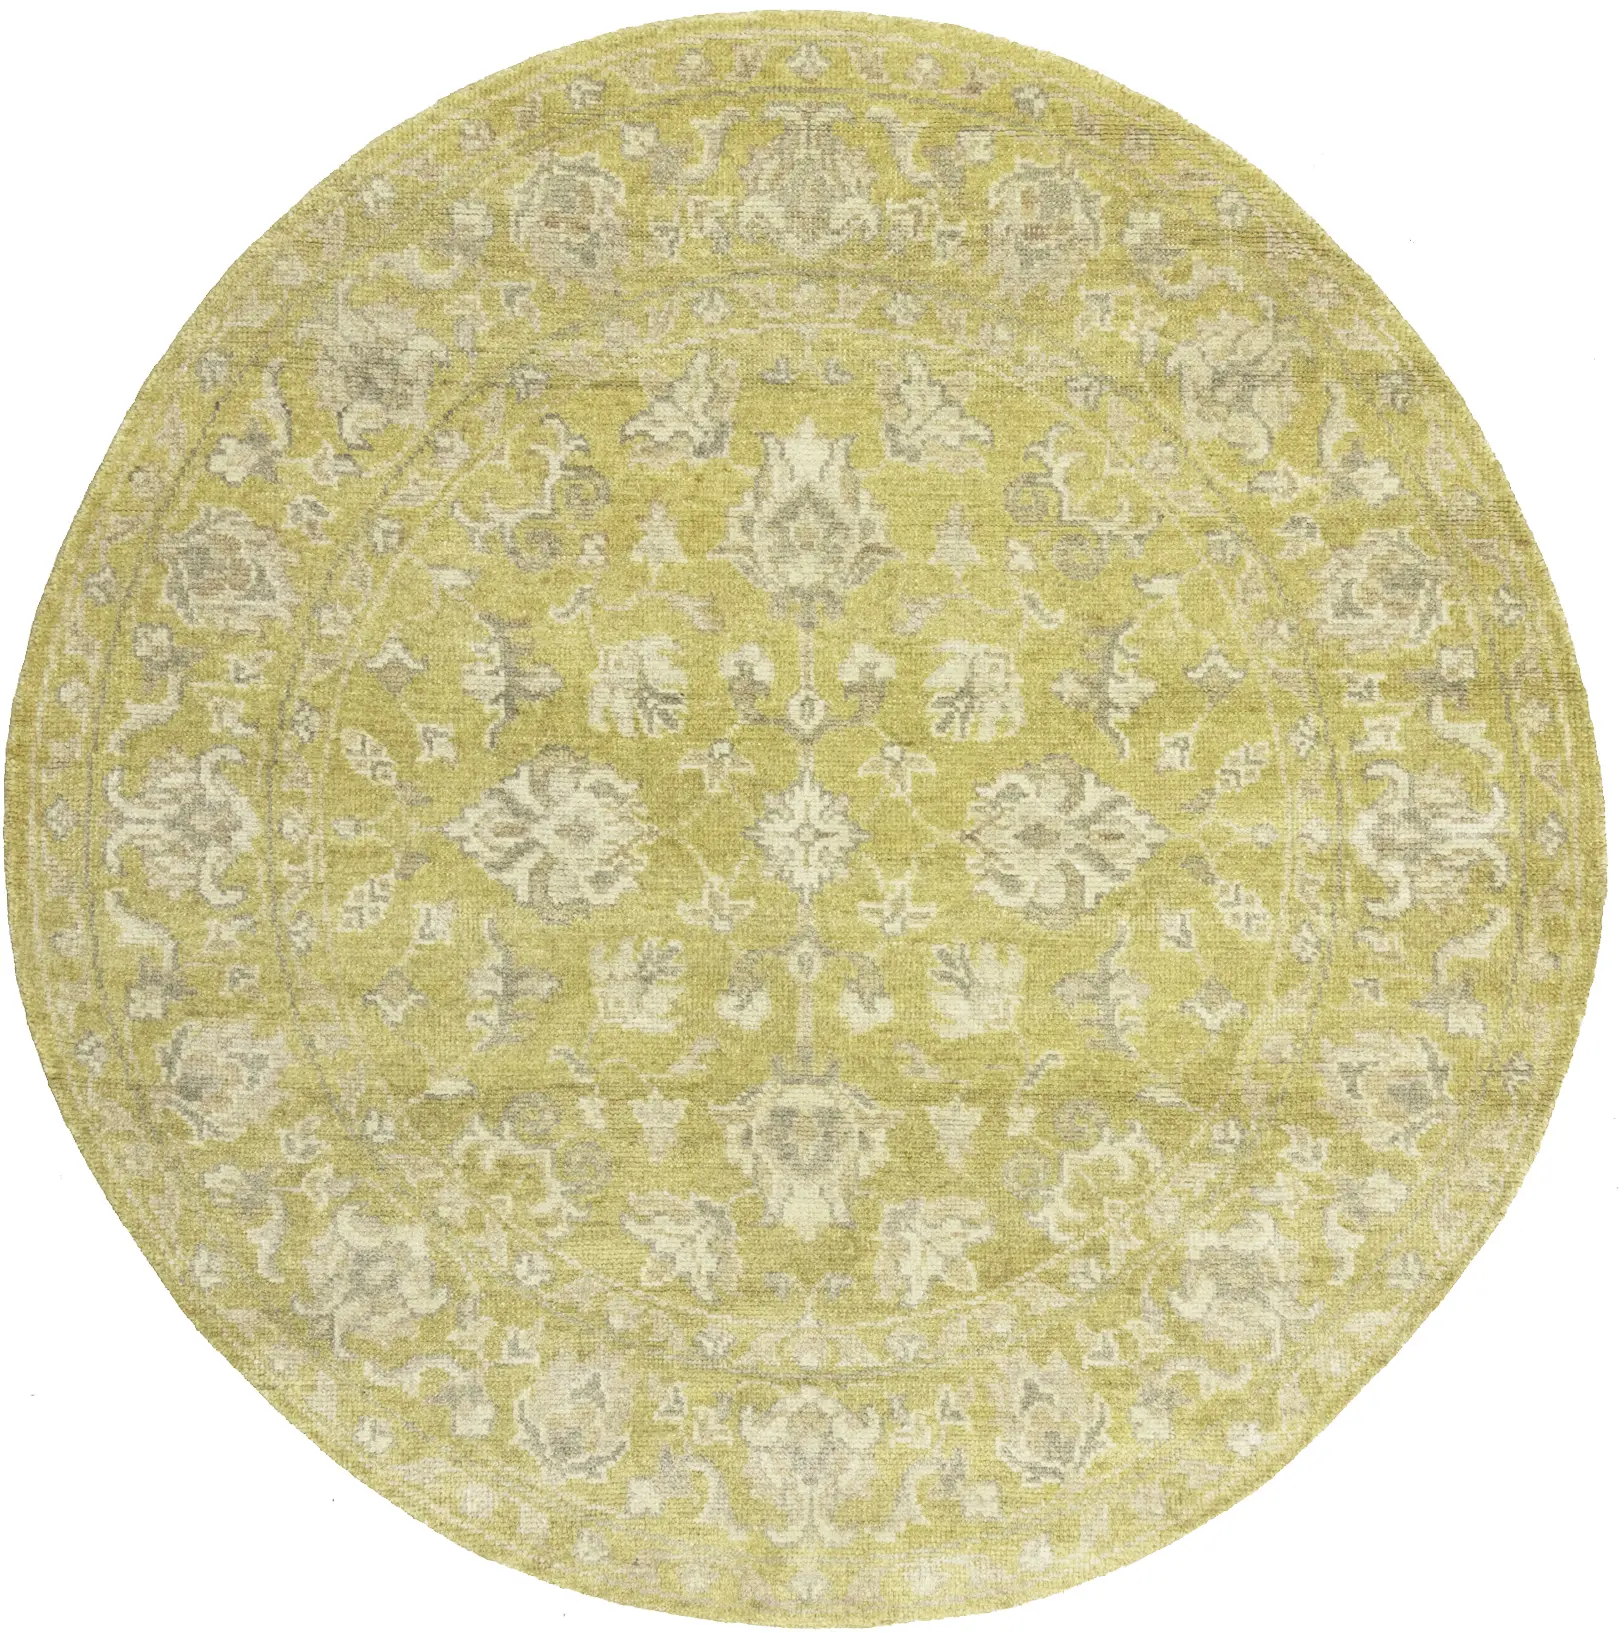 Muted Golden Yellow Floral 6X6 Transitional Oriental Round Rug